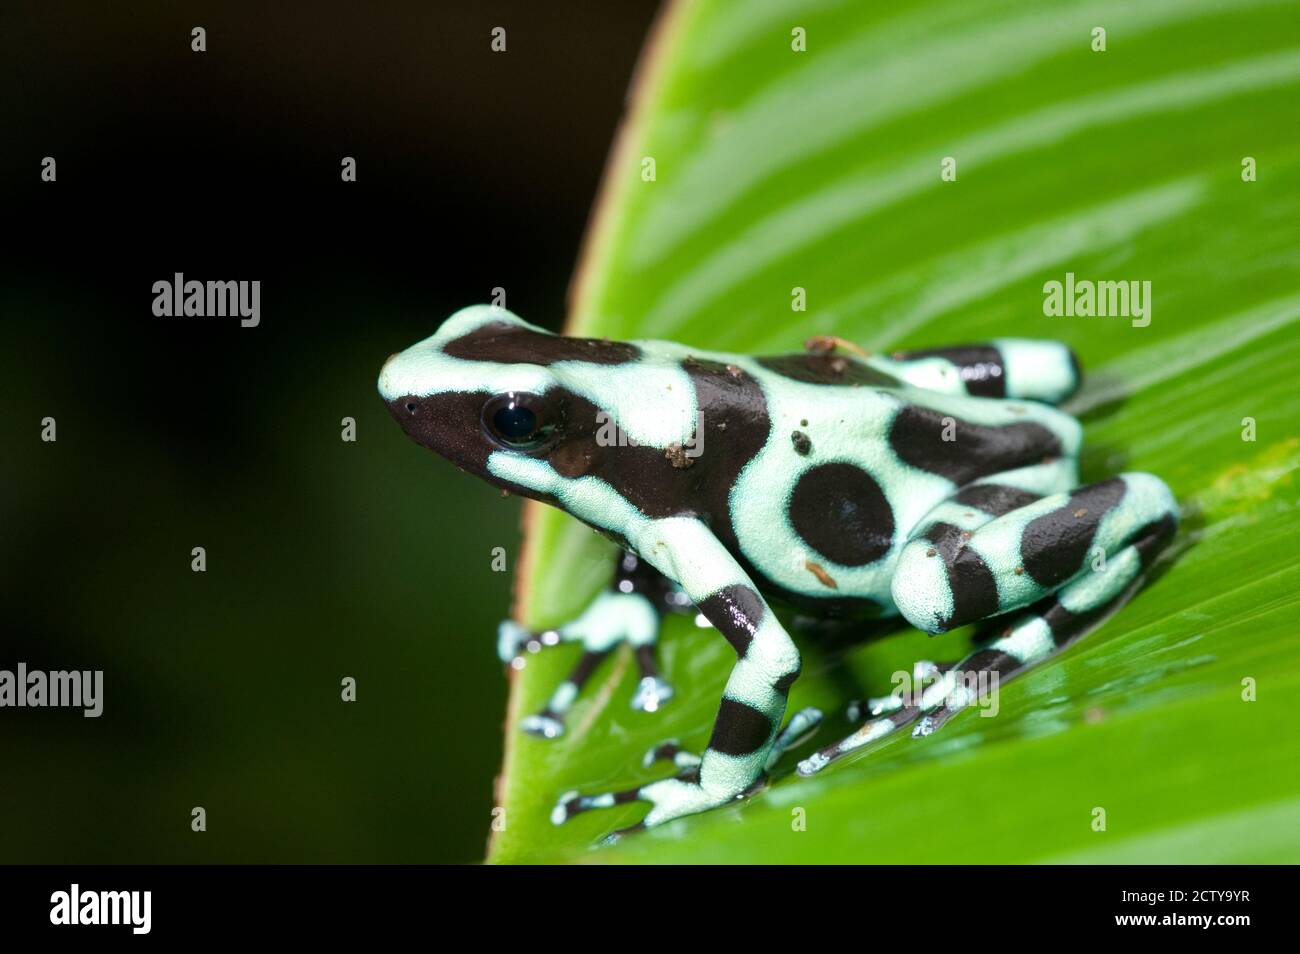 Close-up of a Green and Black Poison Dart frog (Dendrobates auratus) on a leaf, Costa Rica Stock Photo